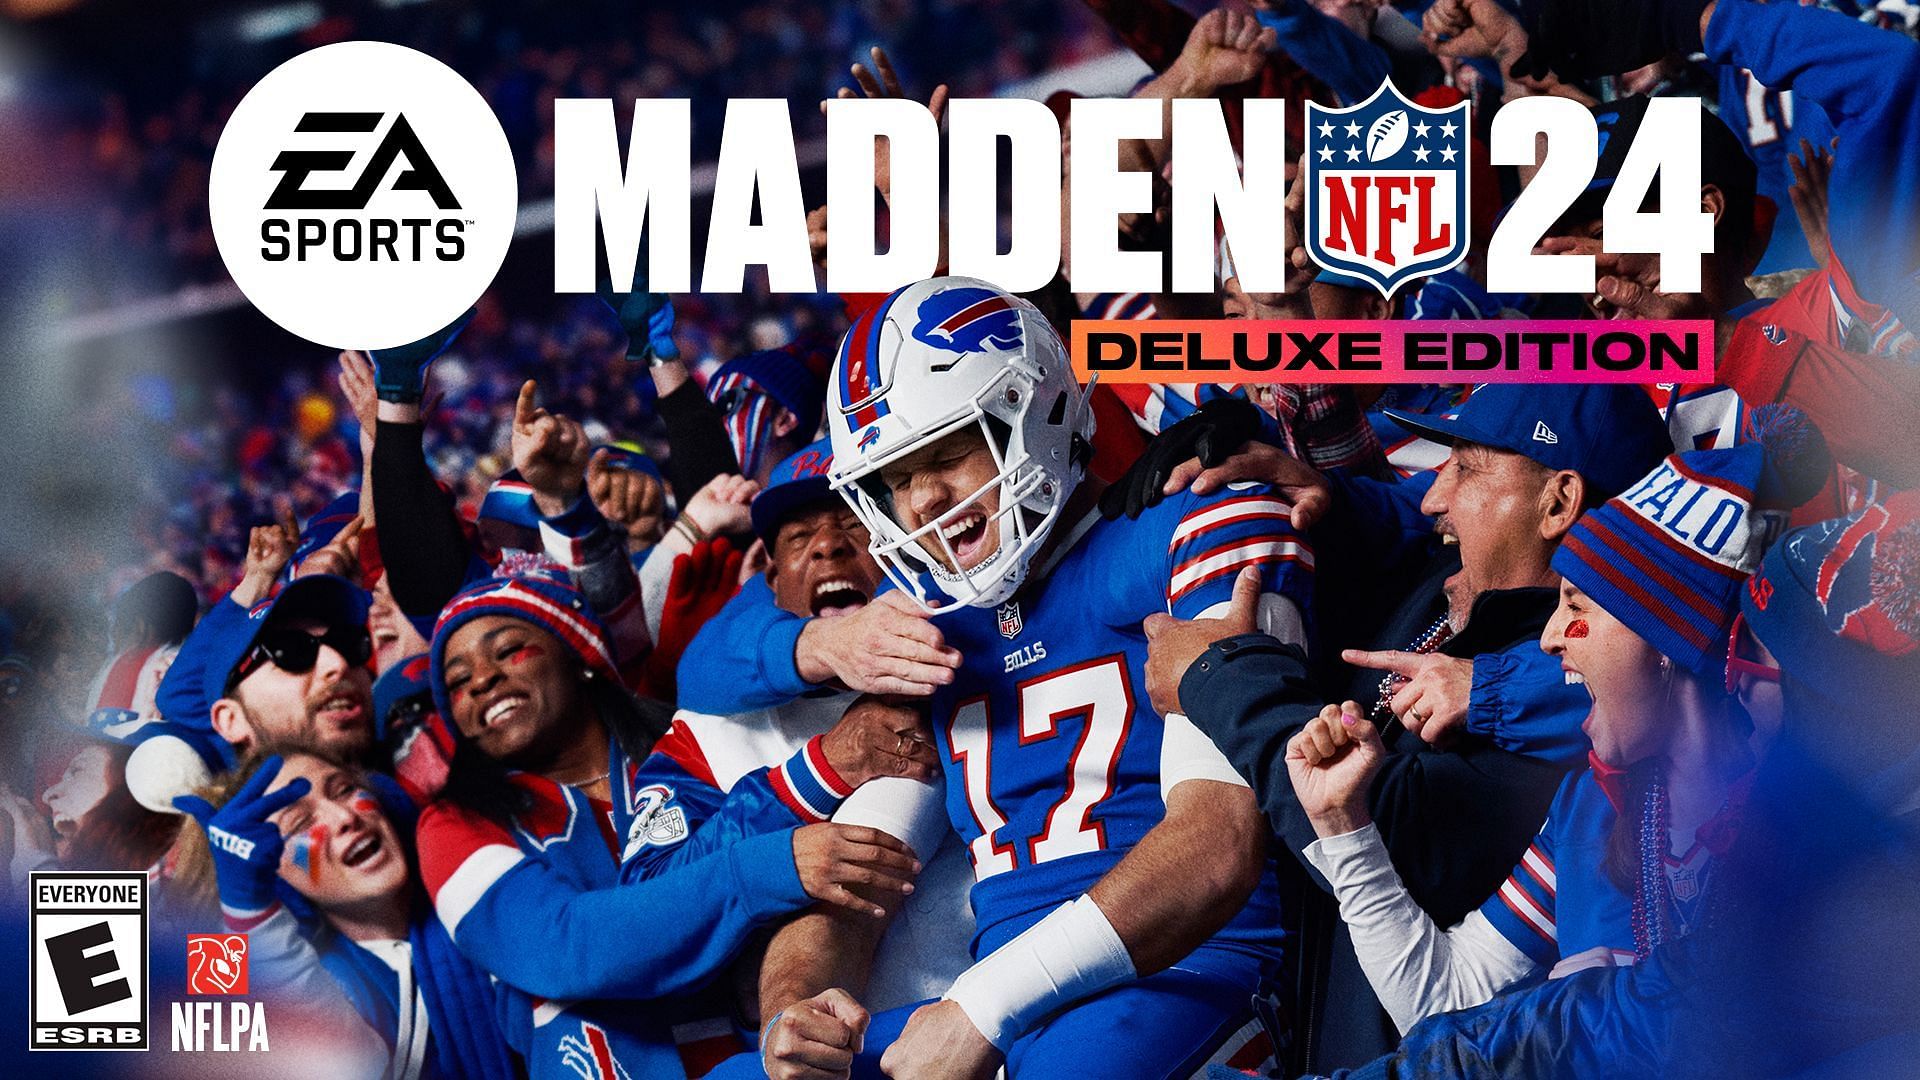 Cover Photo of Madden 24 Deluxe Edition featuring Buffalo Bills quarterback Josh Allen. (Image credit: Electronic Arts)